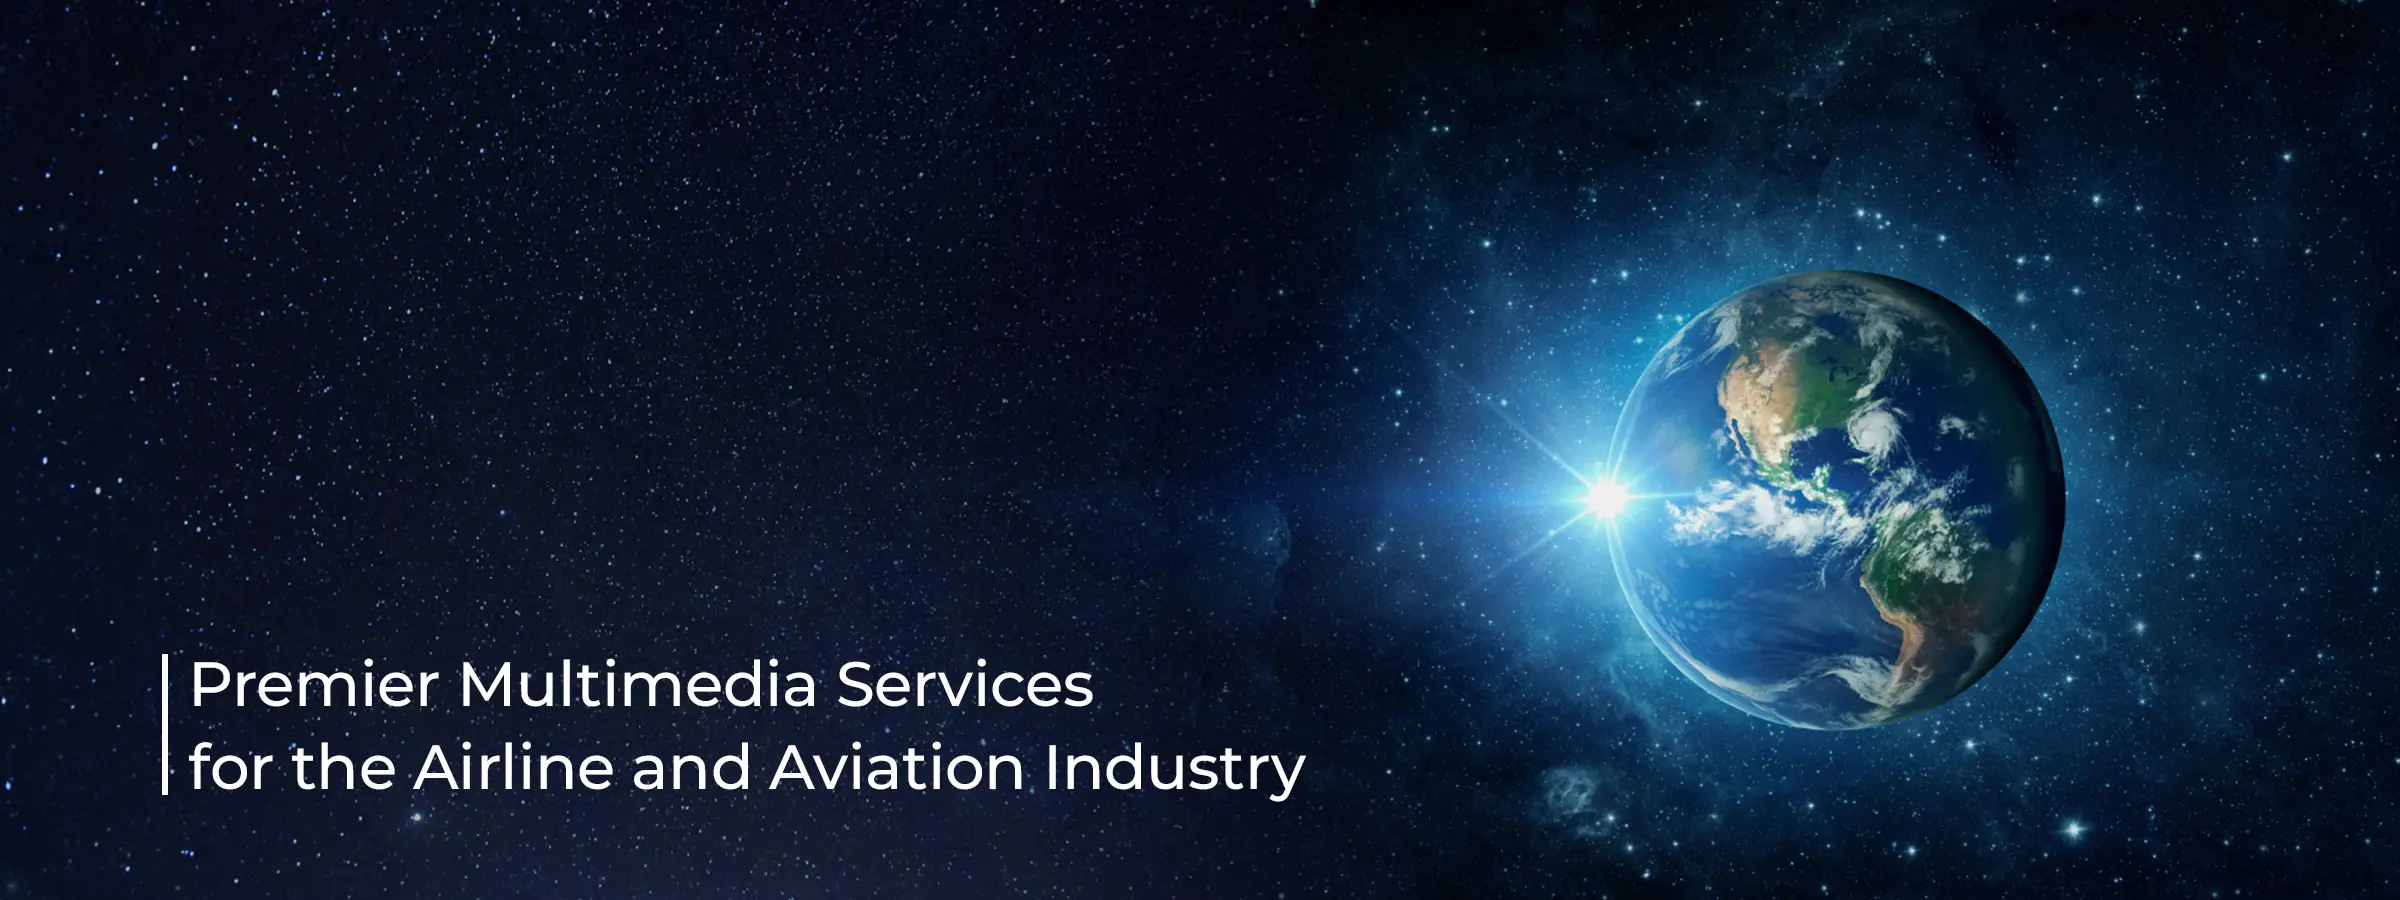 airline-aviation-industry